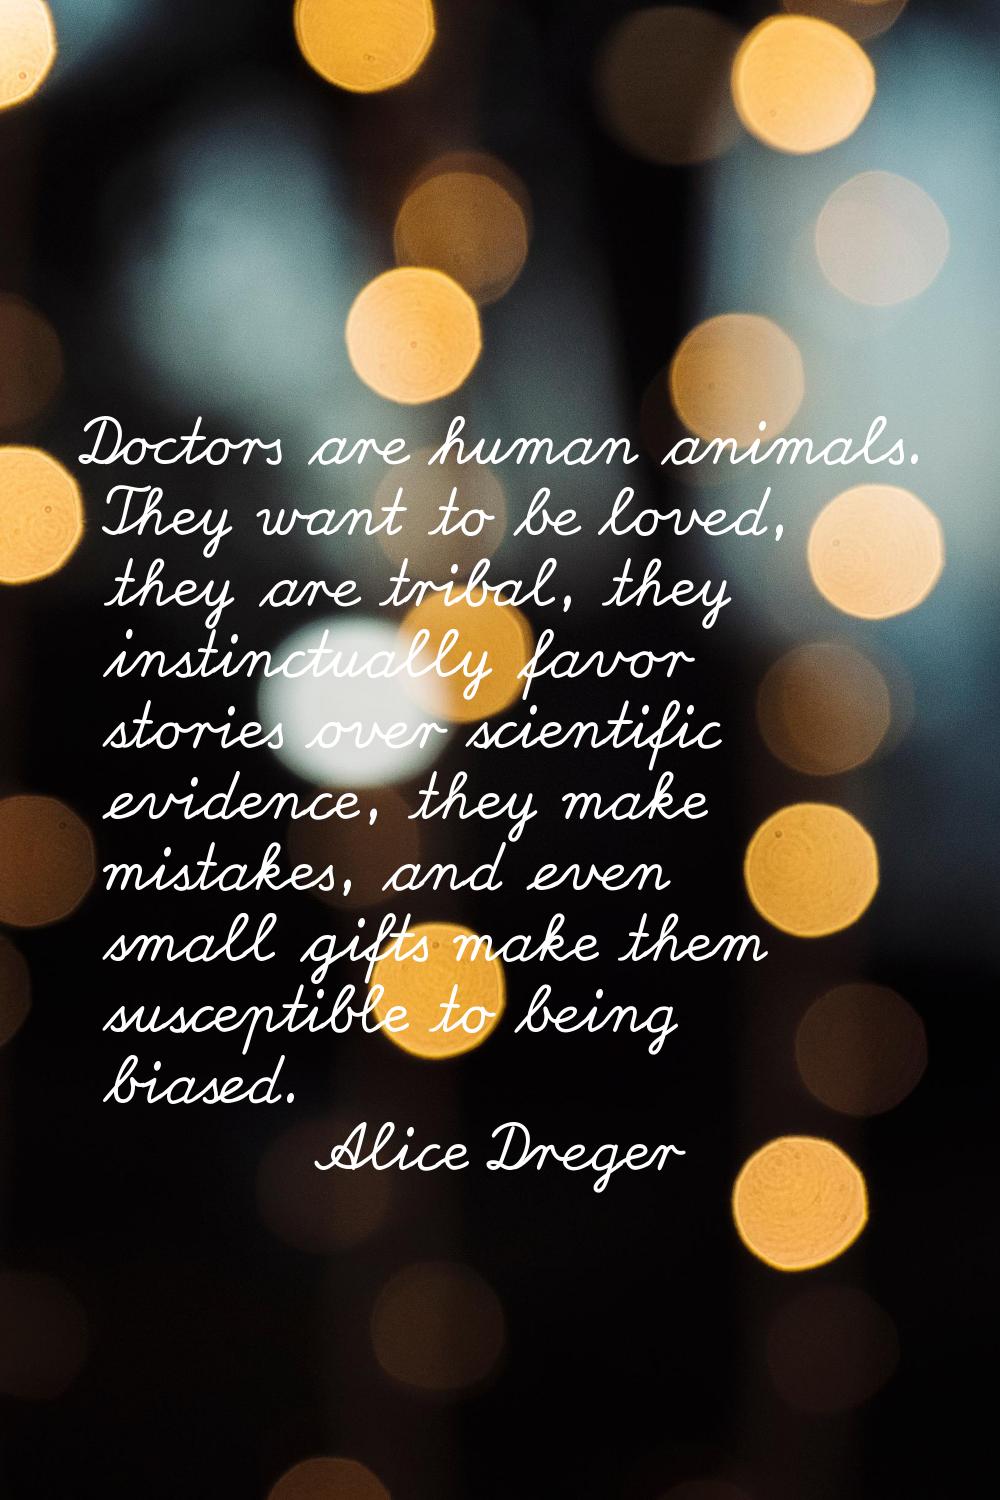 Doctors are human animals. They want to be loved, they are tribal, they instinctually favor stories